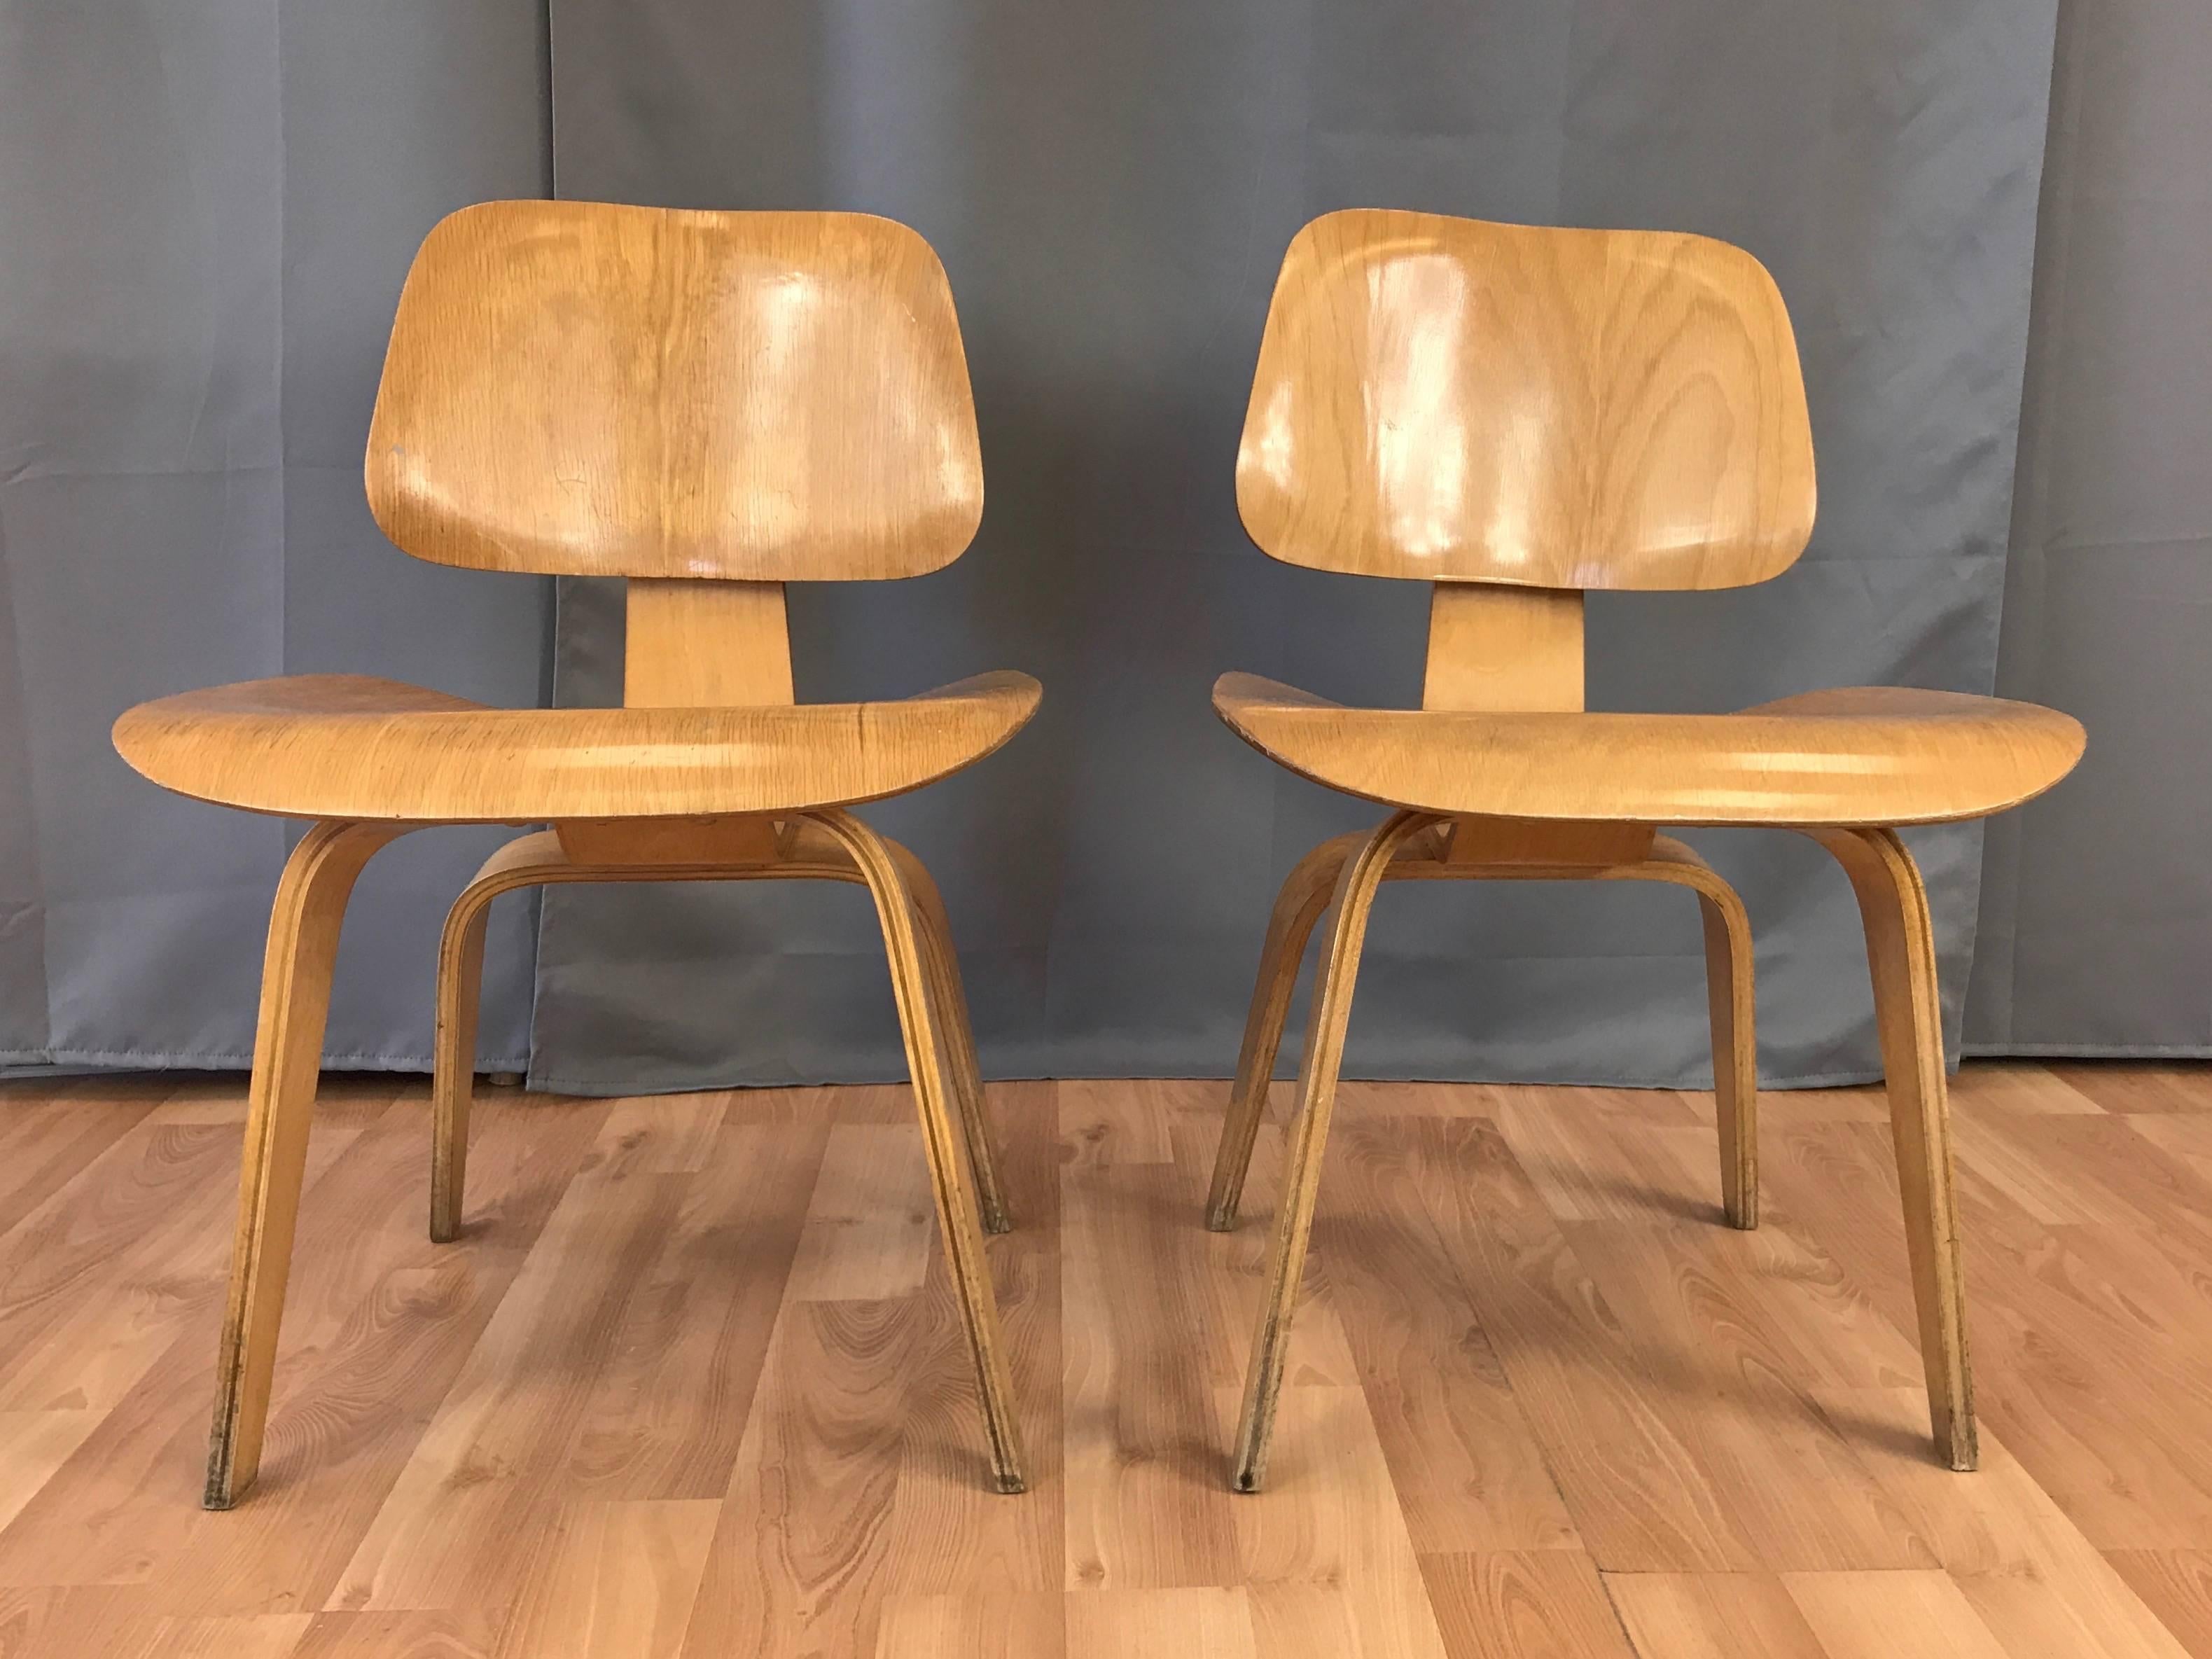 A rare matched pair of 1948 Charles Eames-designed DCW chairs in ash, manufactured by Evans Products Company for Herman Miller.

A very handsome early example of one of the most iconic and enduring mid-century modern chair designs. All original